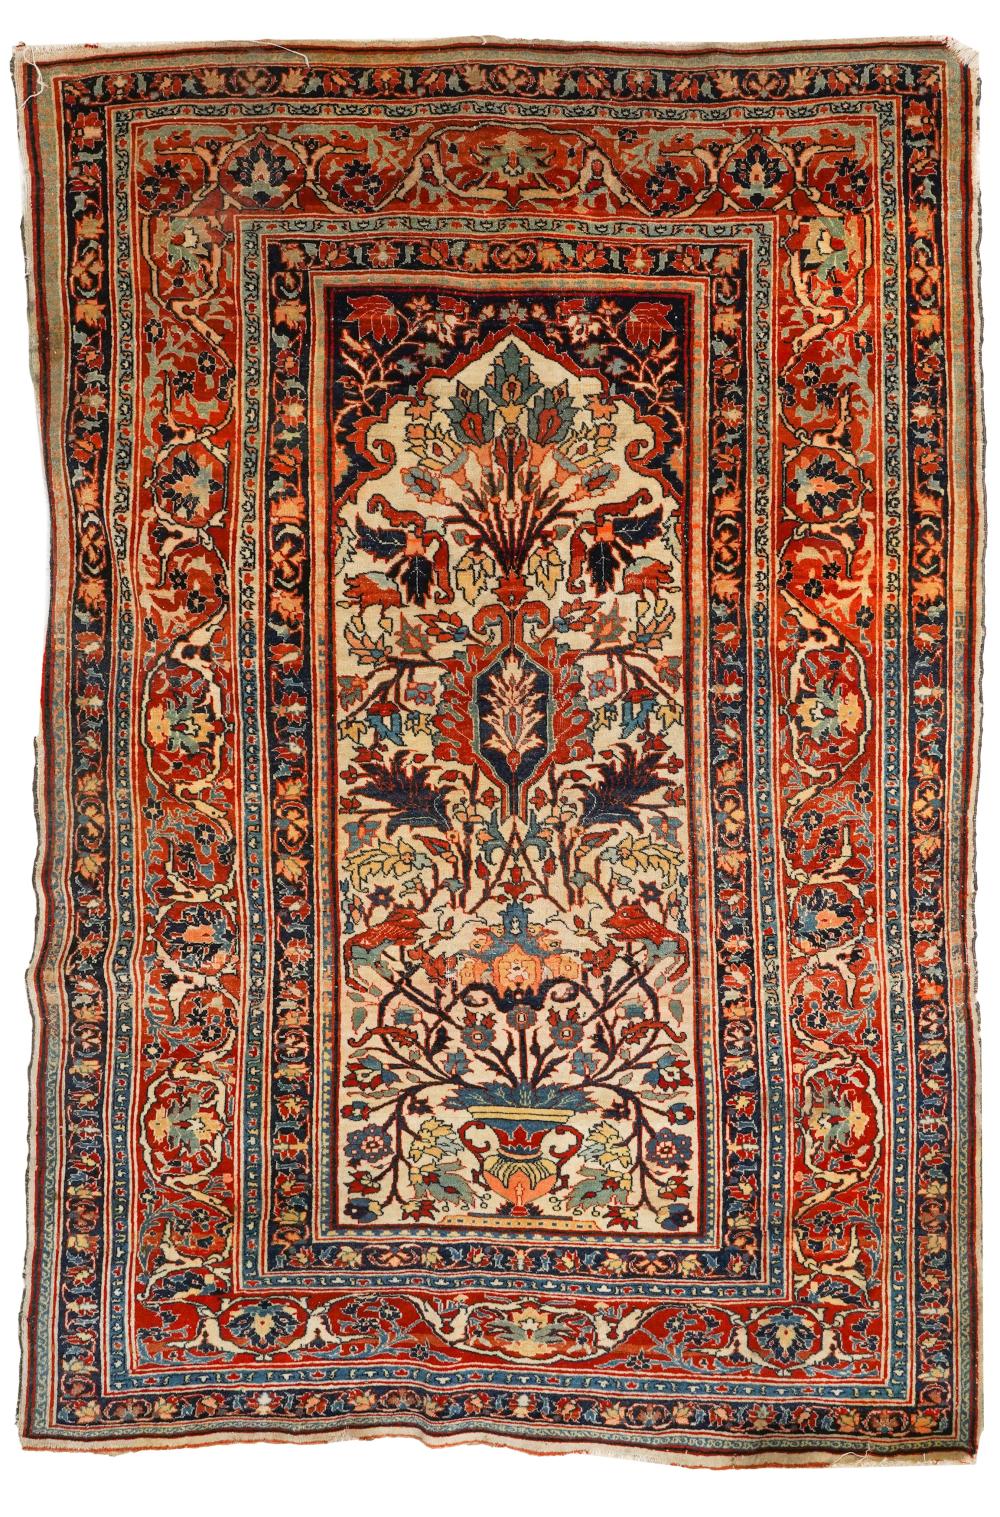 PERSIAN RUGwool on cotton; Provenance: